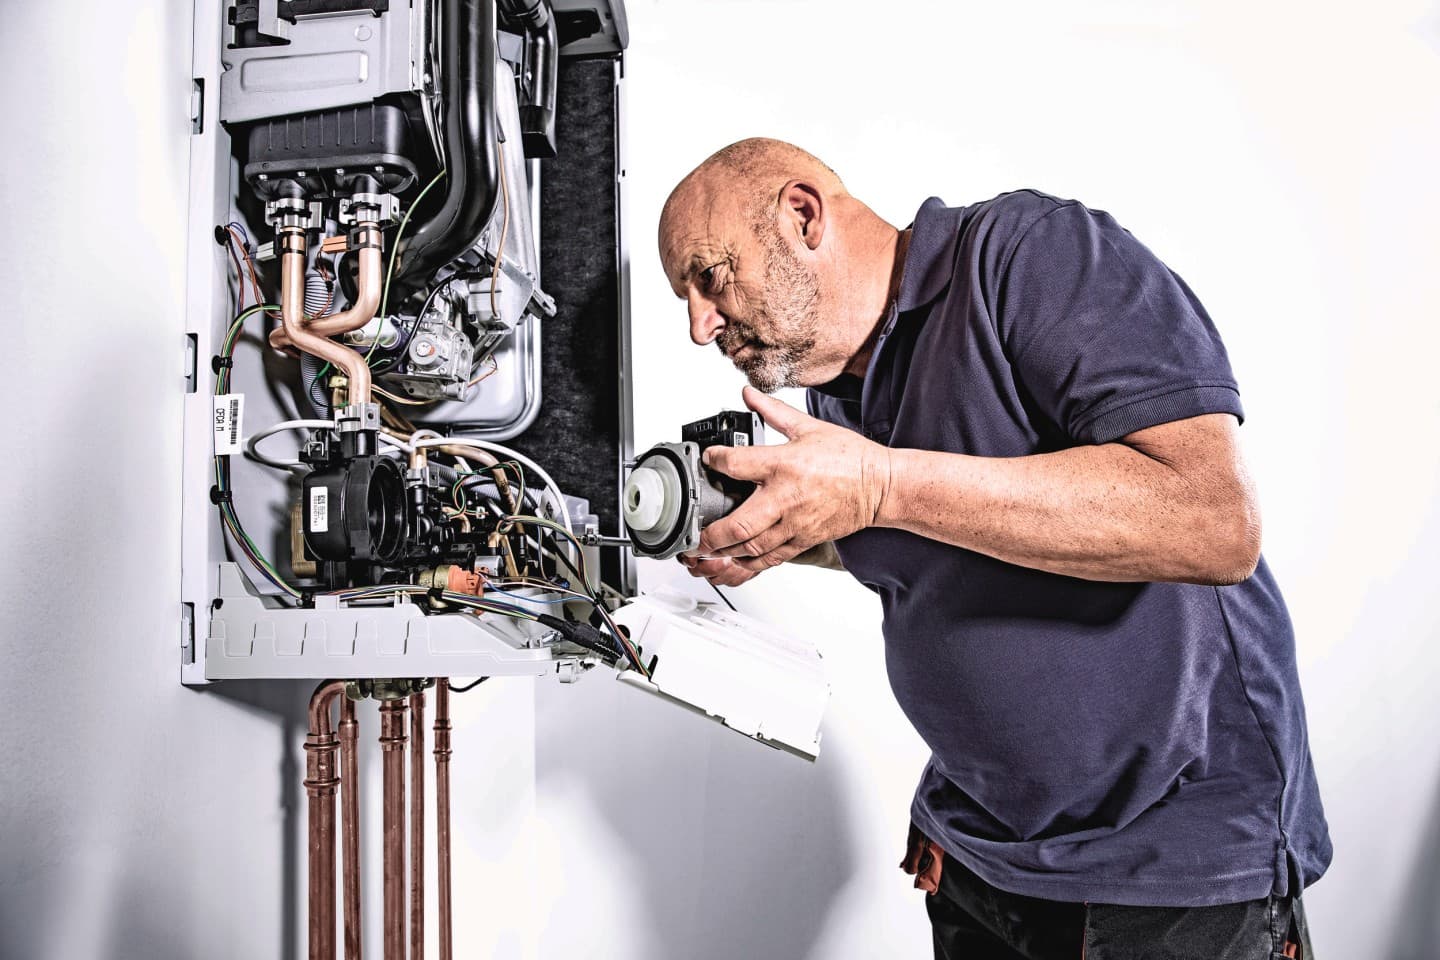 Vaillant heating systems